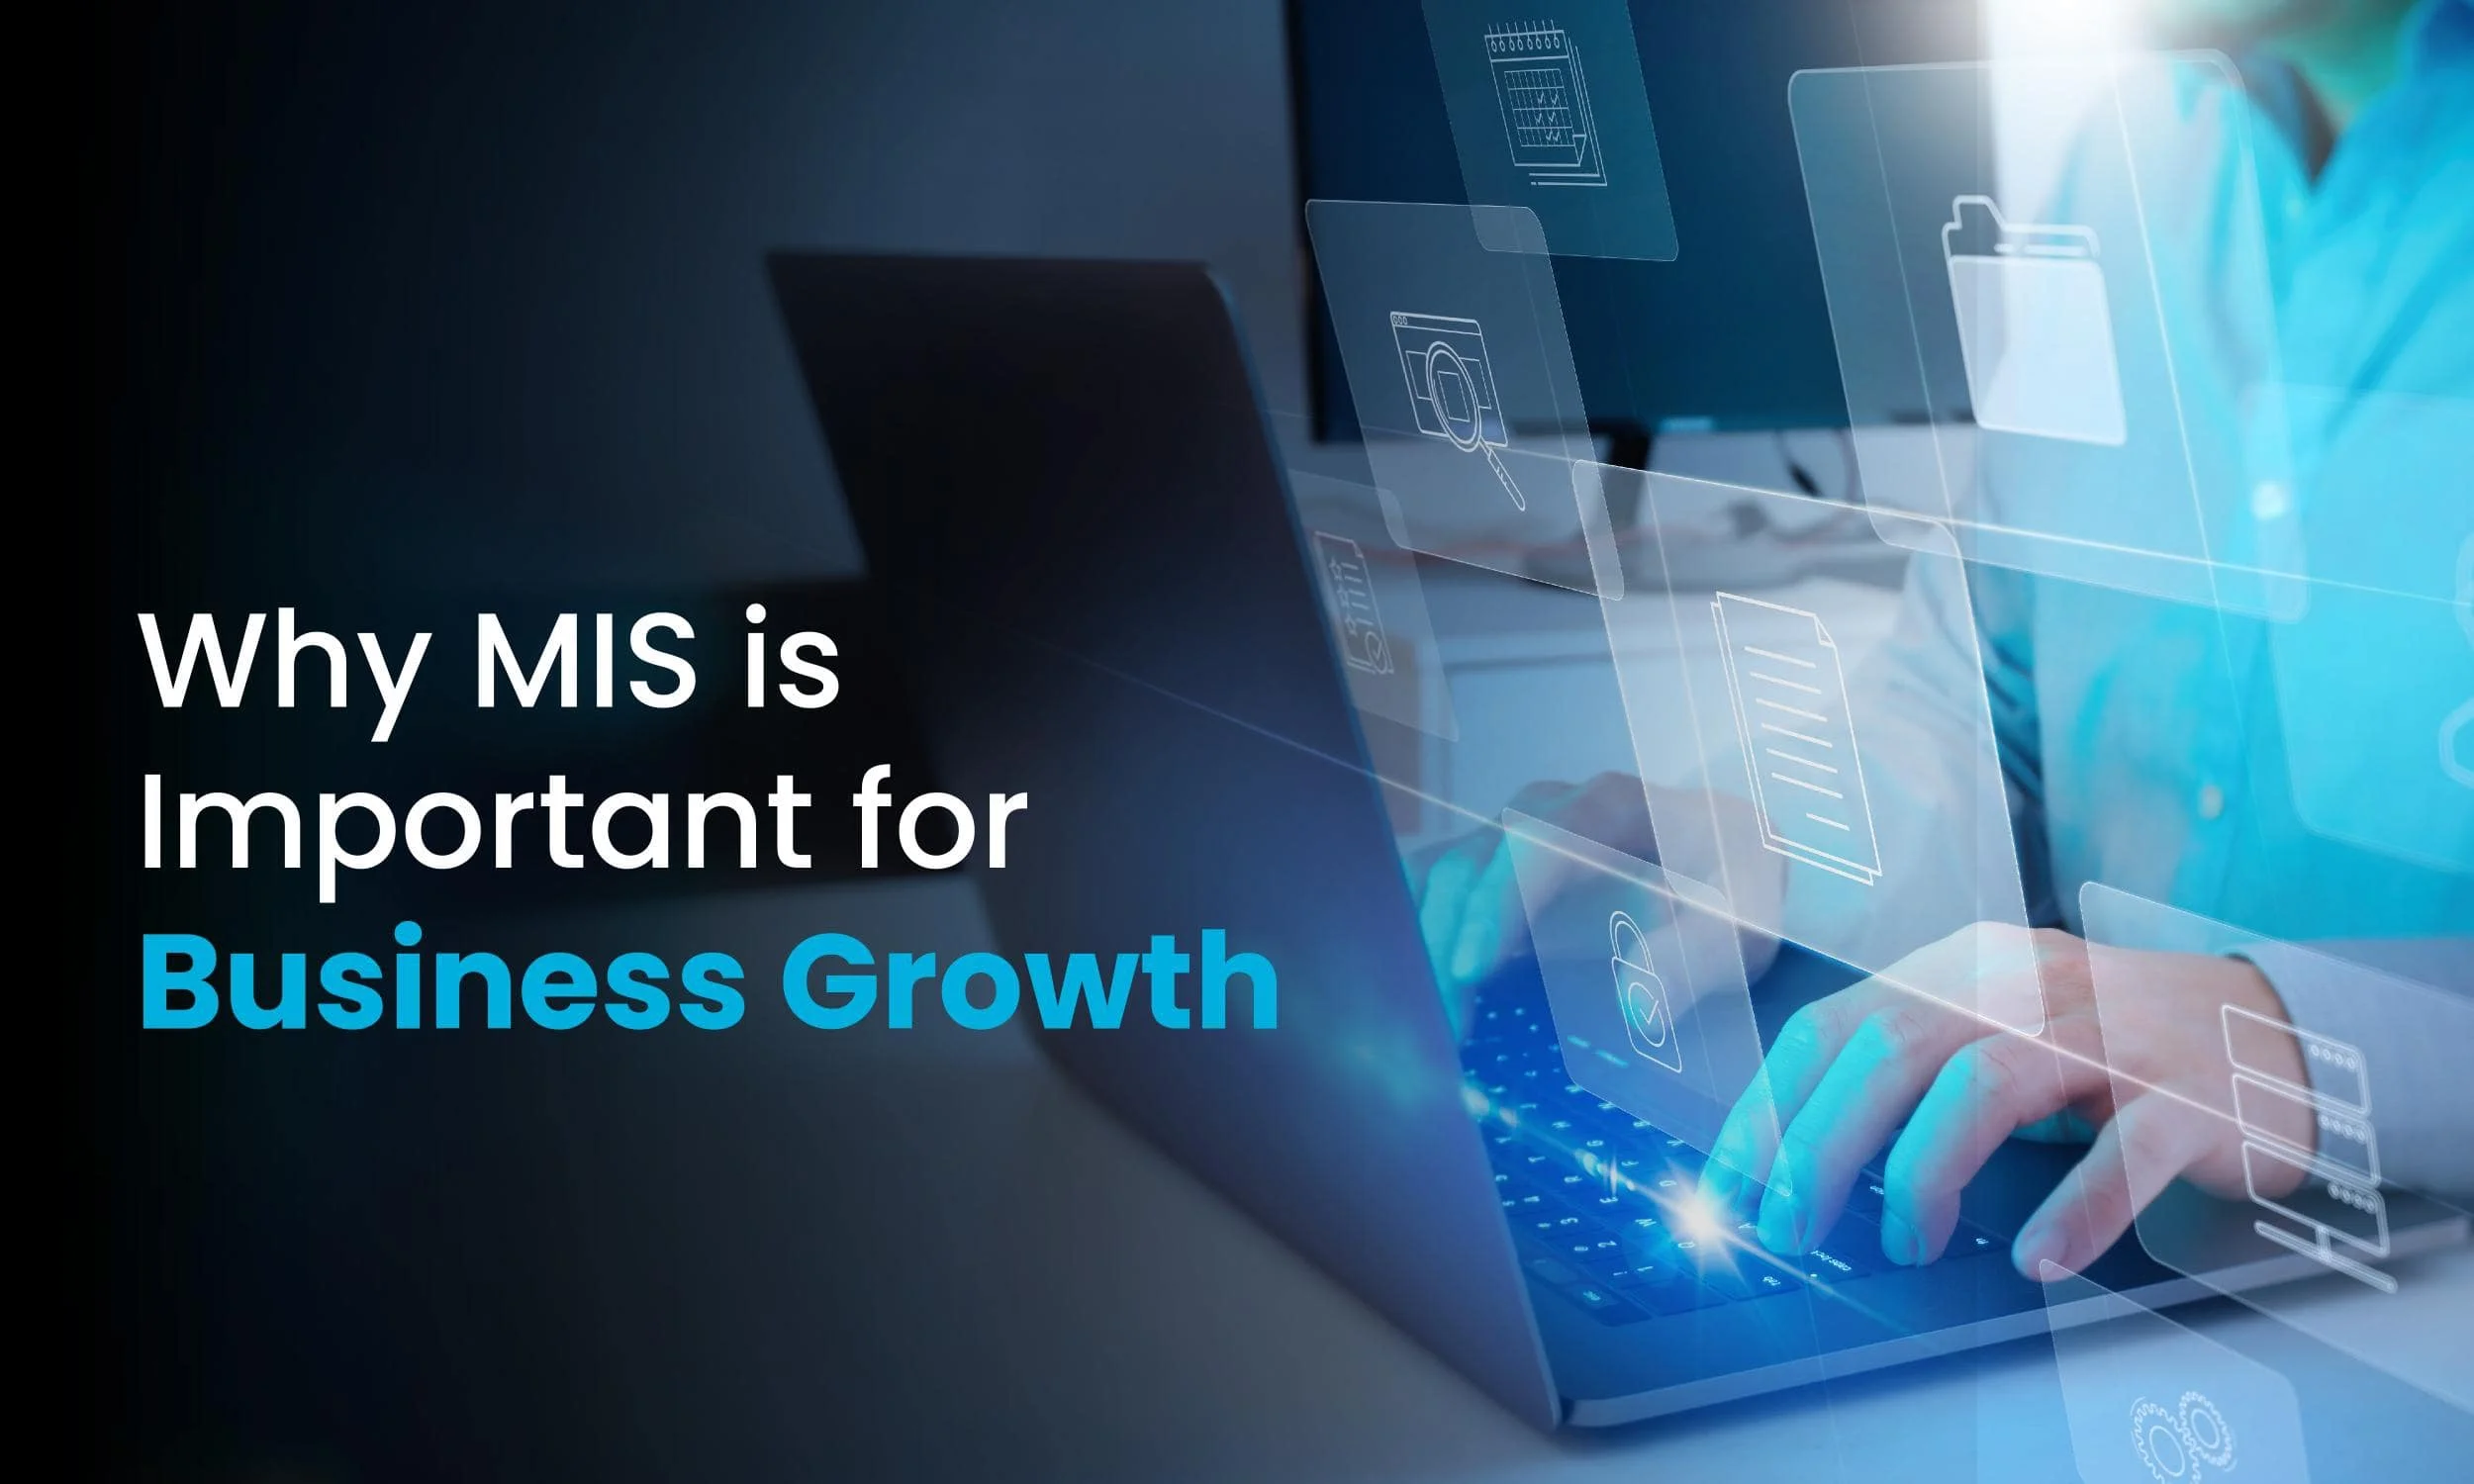 Why MIS (marketing information system) is Important for Business Growth